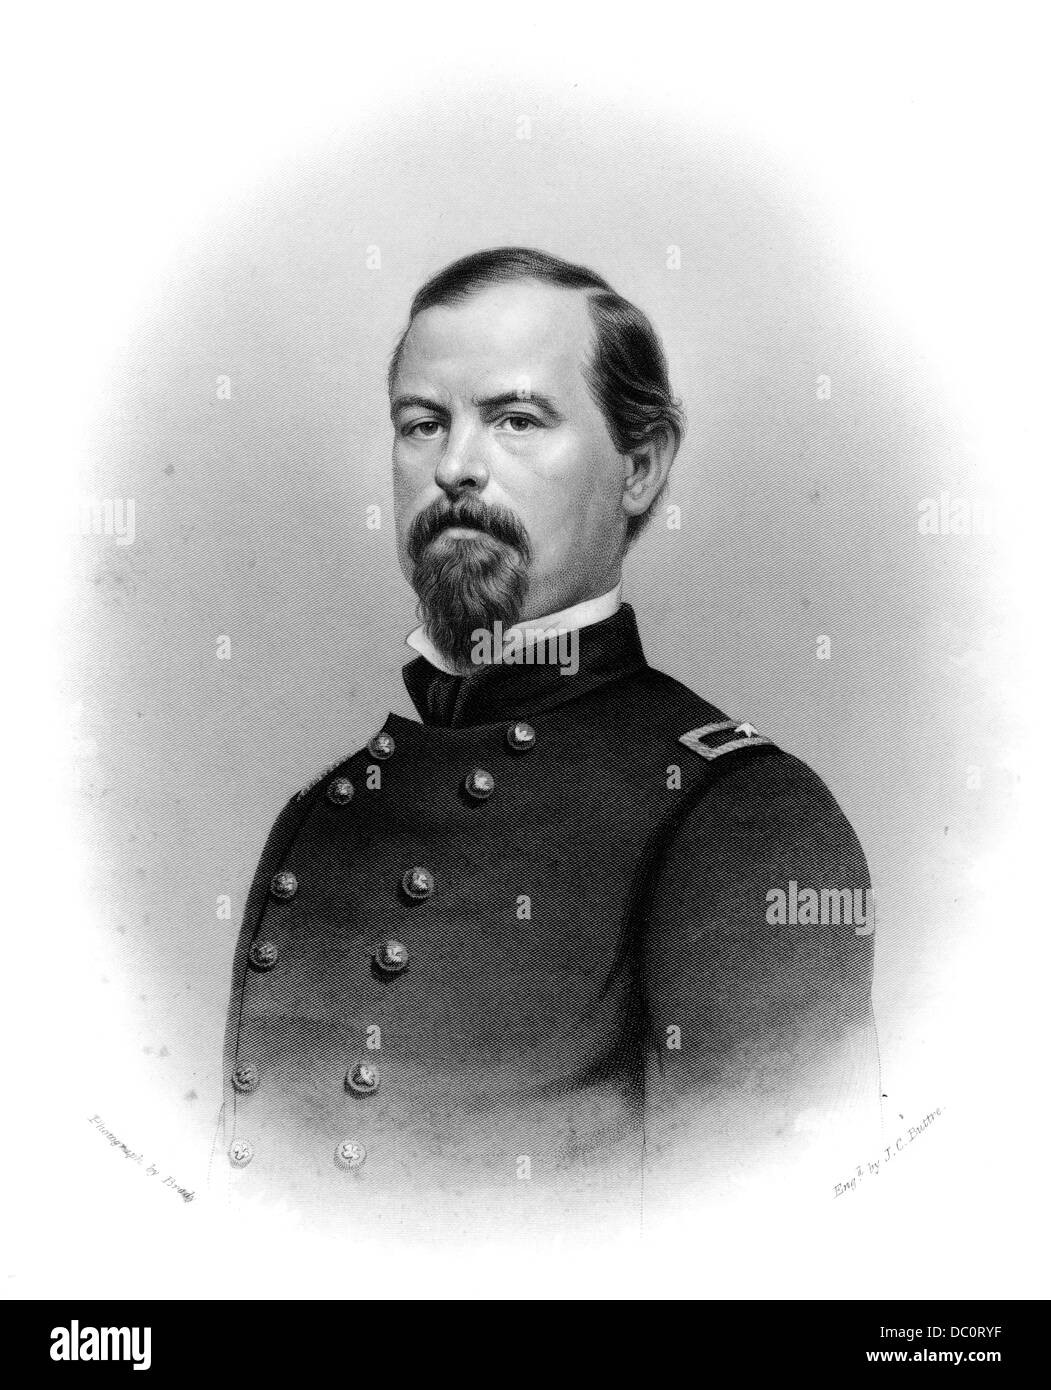 1800s 1860s PORTRAIT BRIGADIER GENERAL IRWIN MCDOWELL UNION ARMY DURING CIVIL WAR IN AMERICA Stock Photo